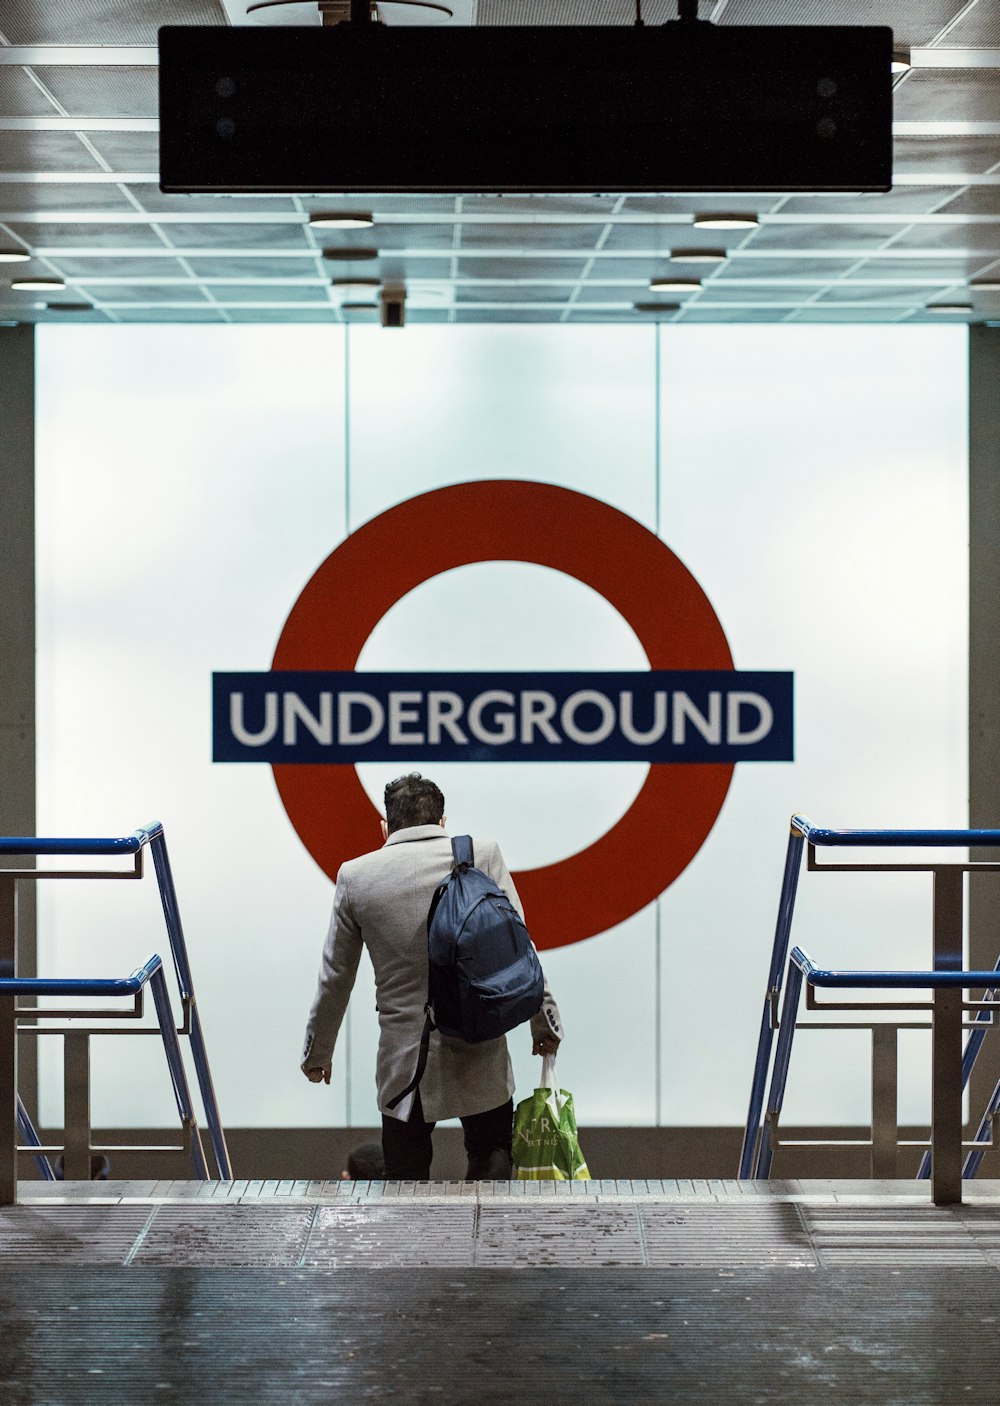 a man with a backpack is standing in front of a underground sign